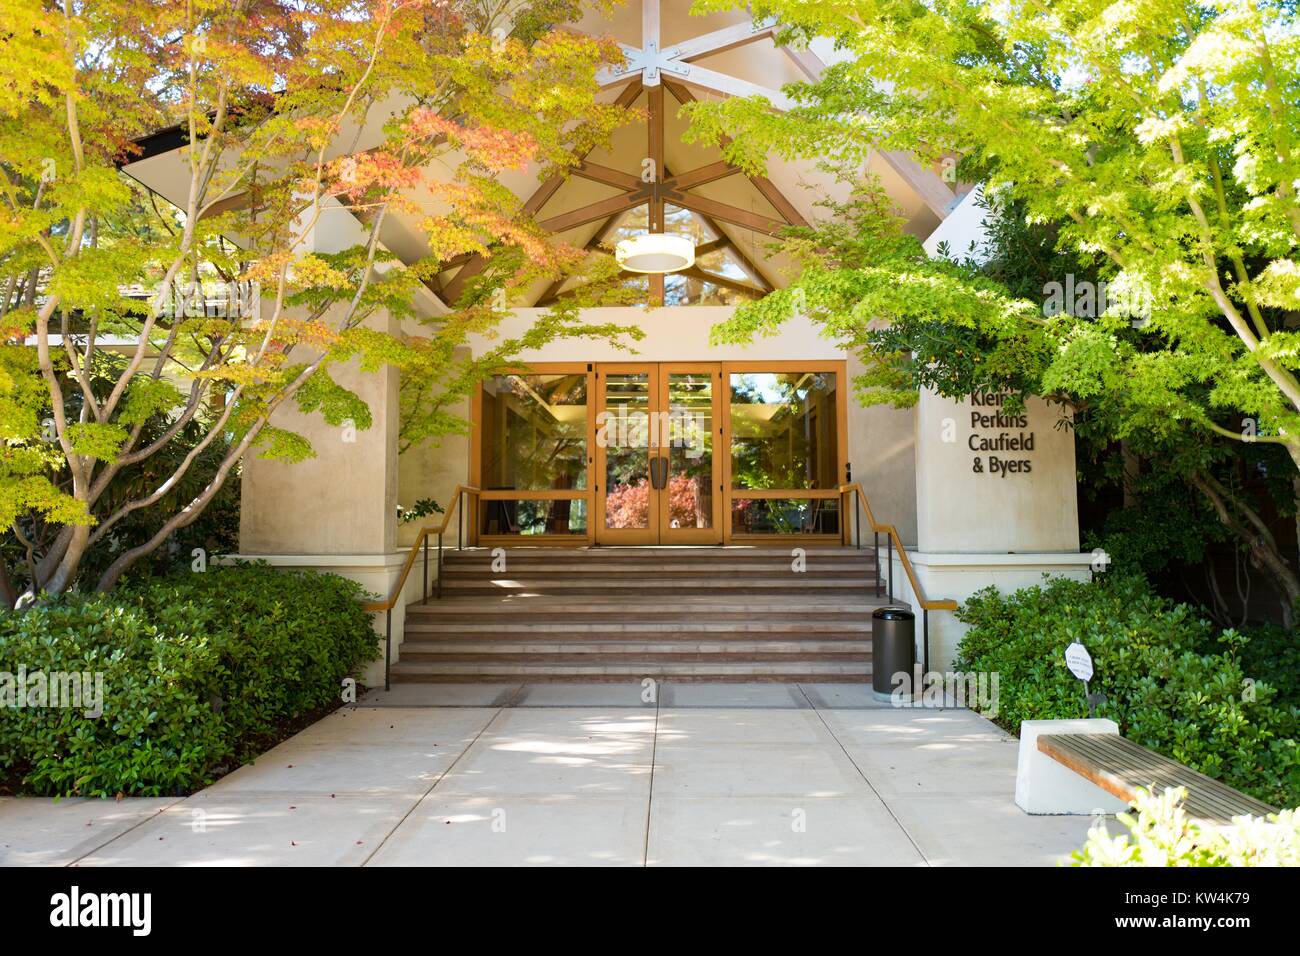 Headquarters of venture capital investment firm Kleiner Perkins Caufield Byers, on Sand Hill Road in the Silicon Valley town of Menlo Park, California, August 25, 2016. Stock Photo